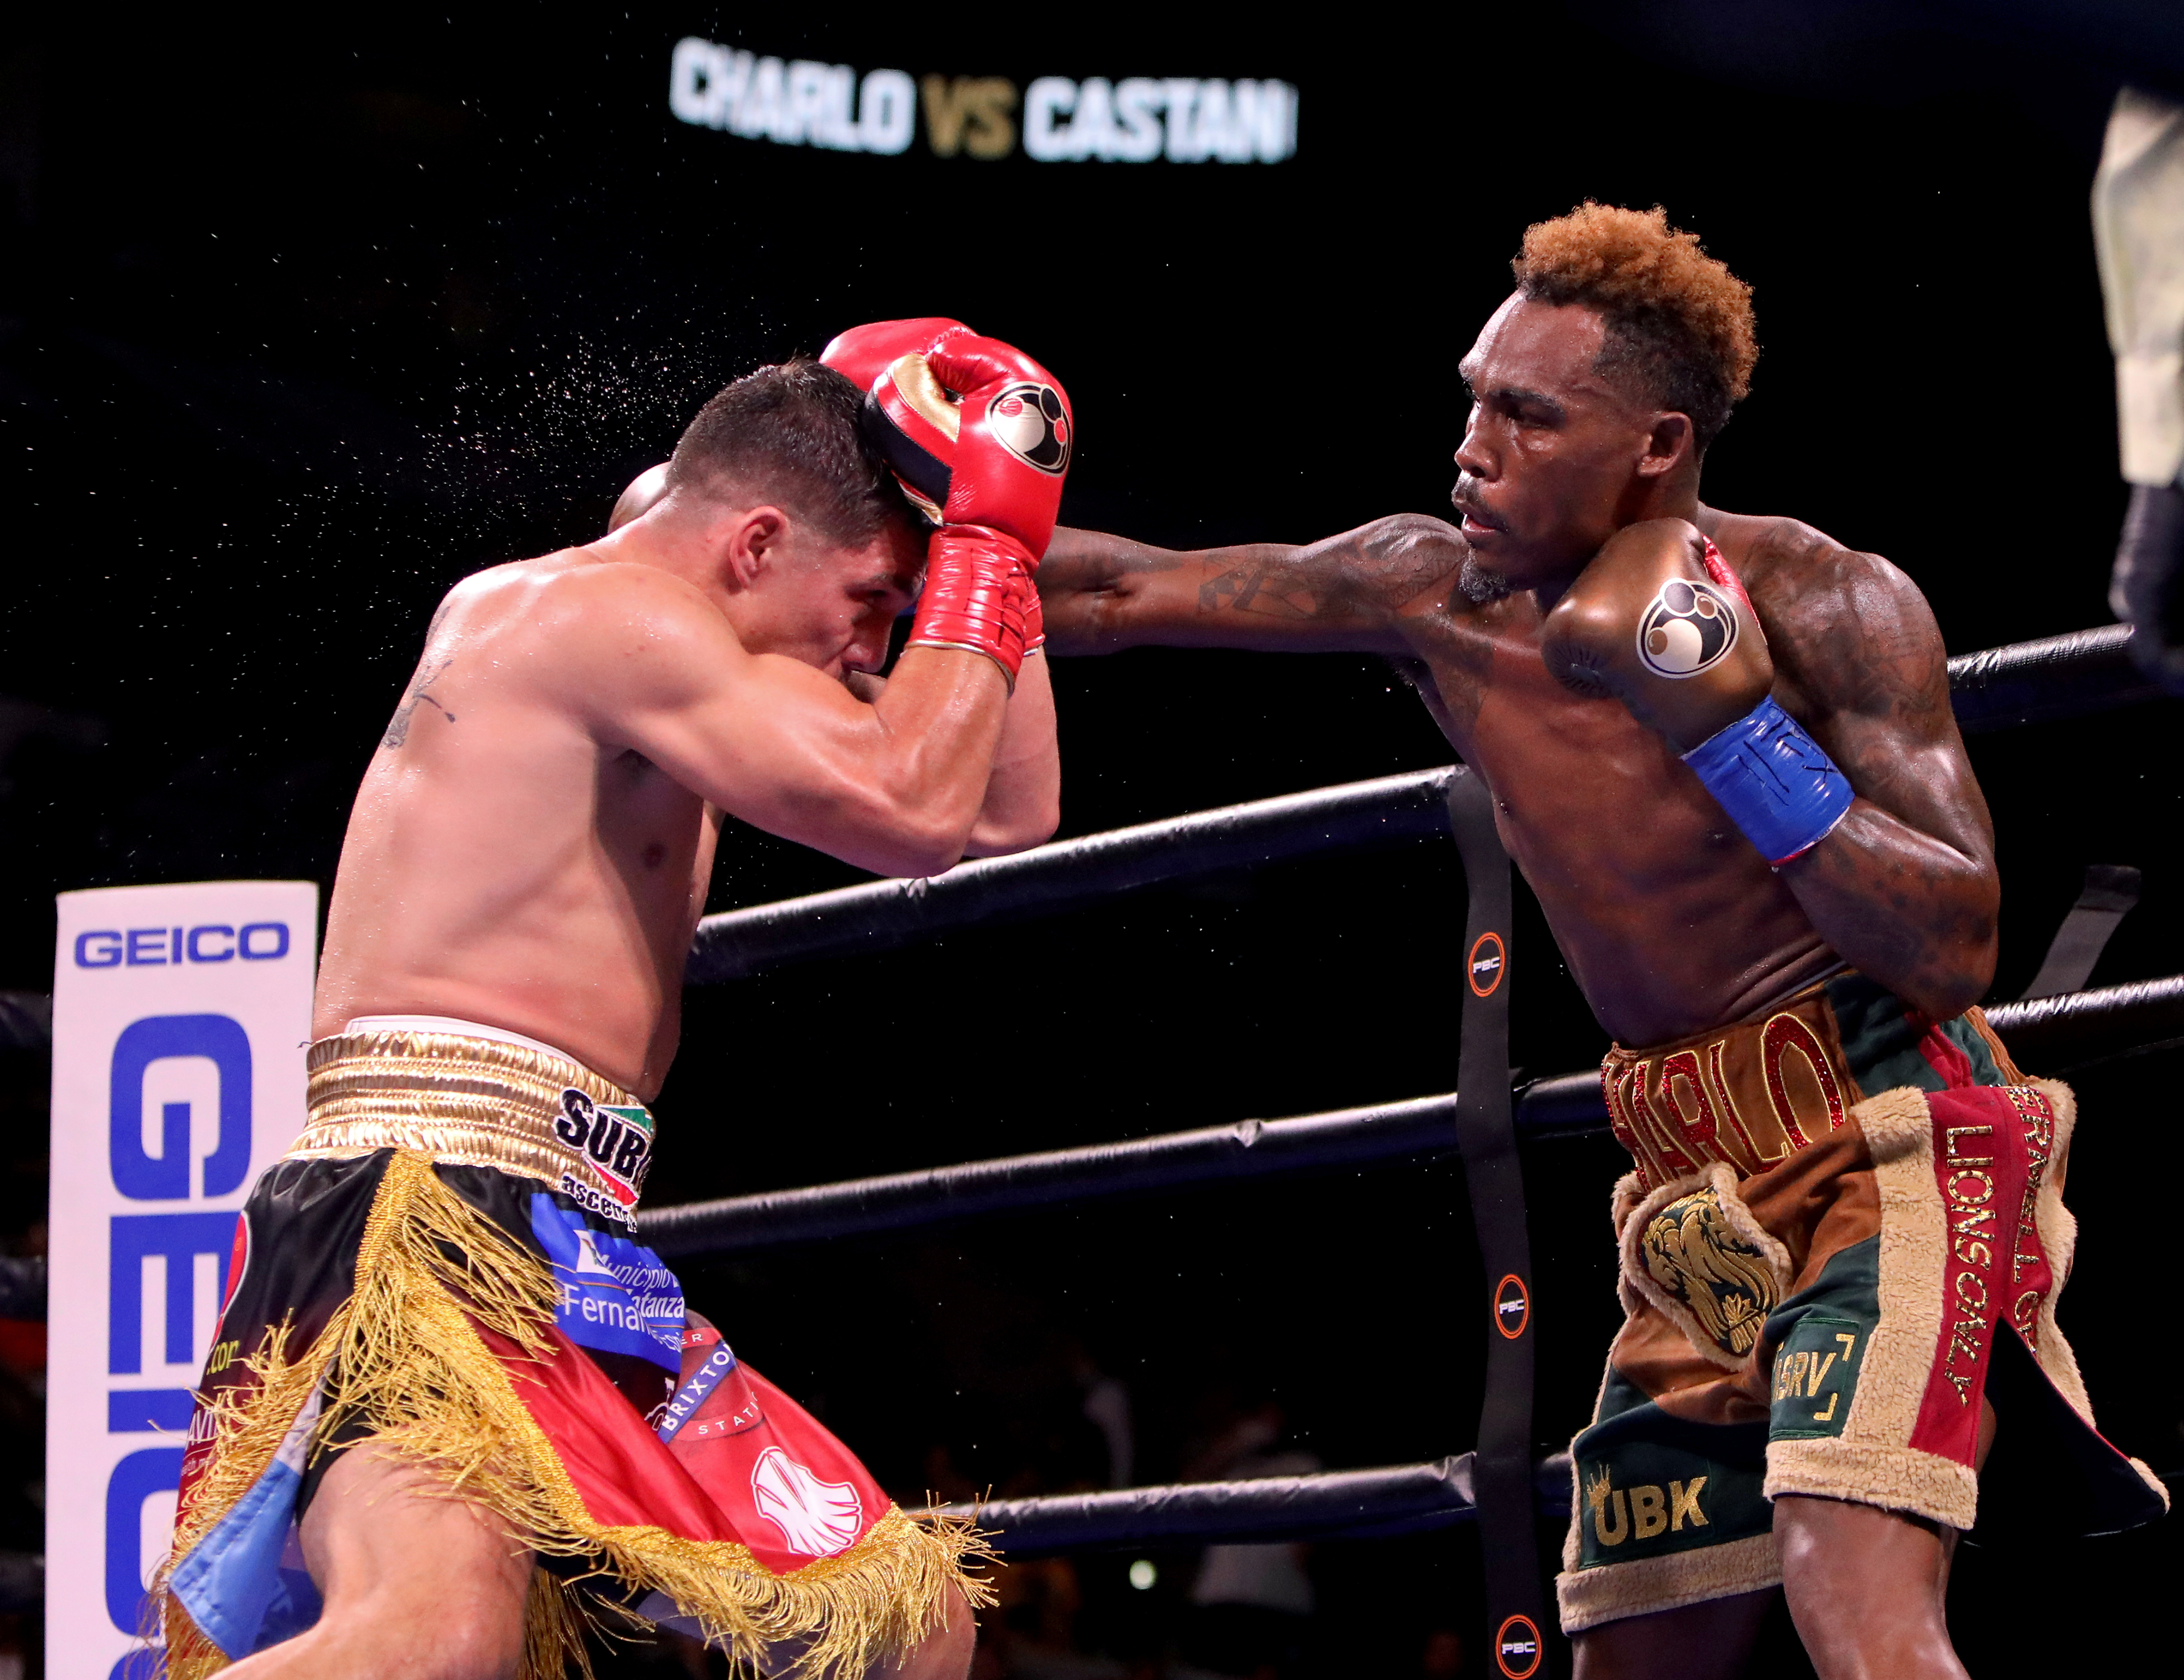 Jermell Charlo (R) and Brian Castano (L) exchange punches during their Super Welterweight fight at AT&amp;T Center on July 17, 2021 in San Antonio, Texas. The Jermell Charlo and Brian Castano fight ended in a split draw.